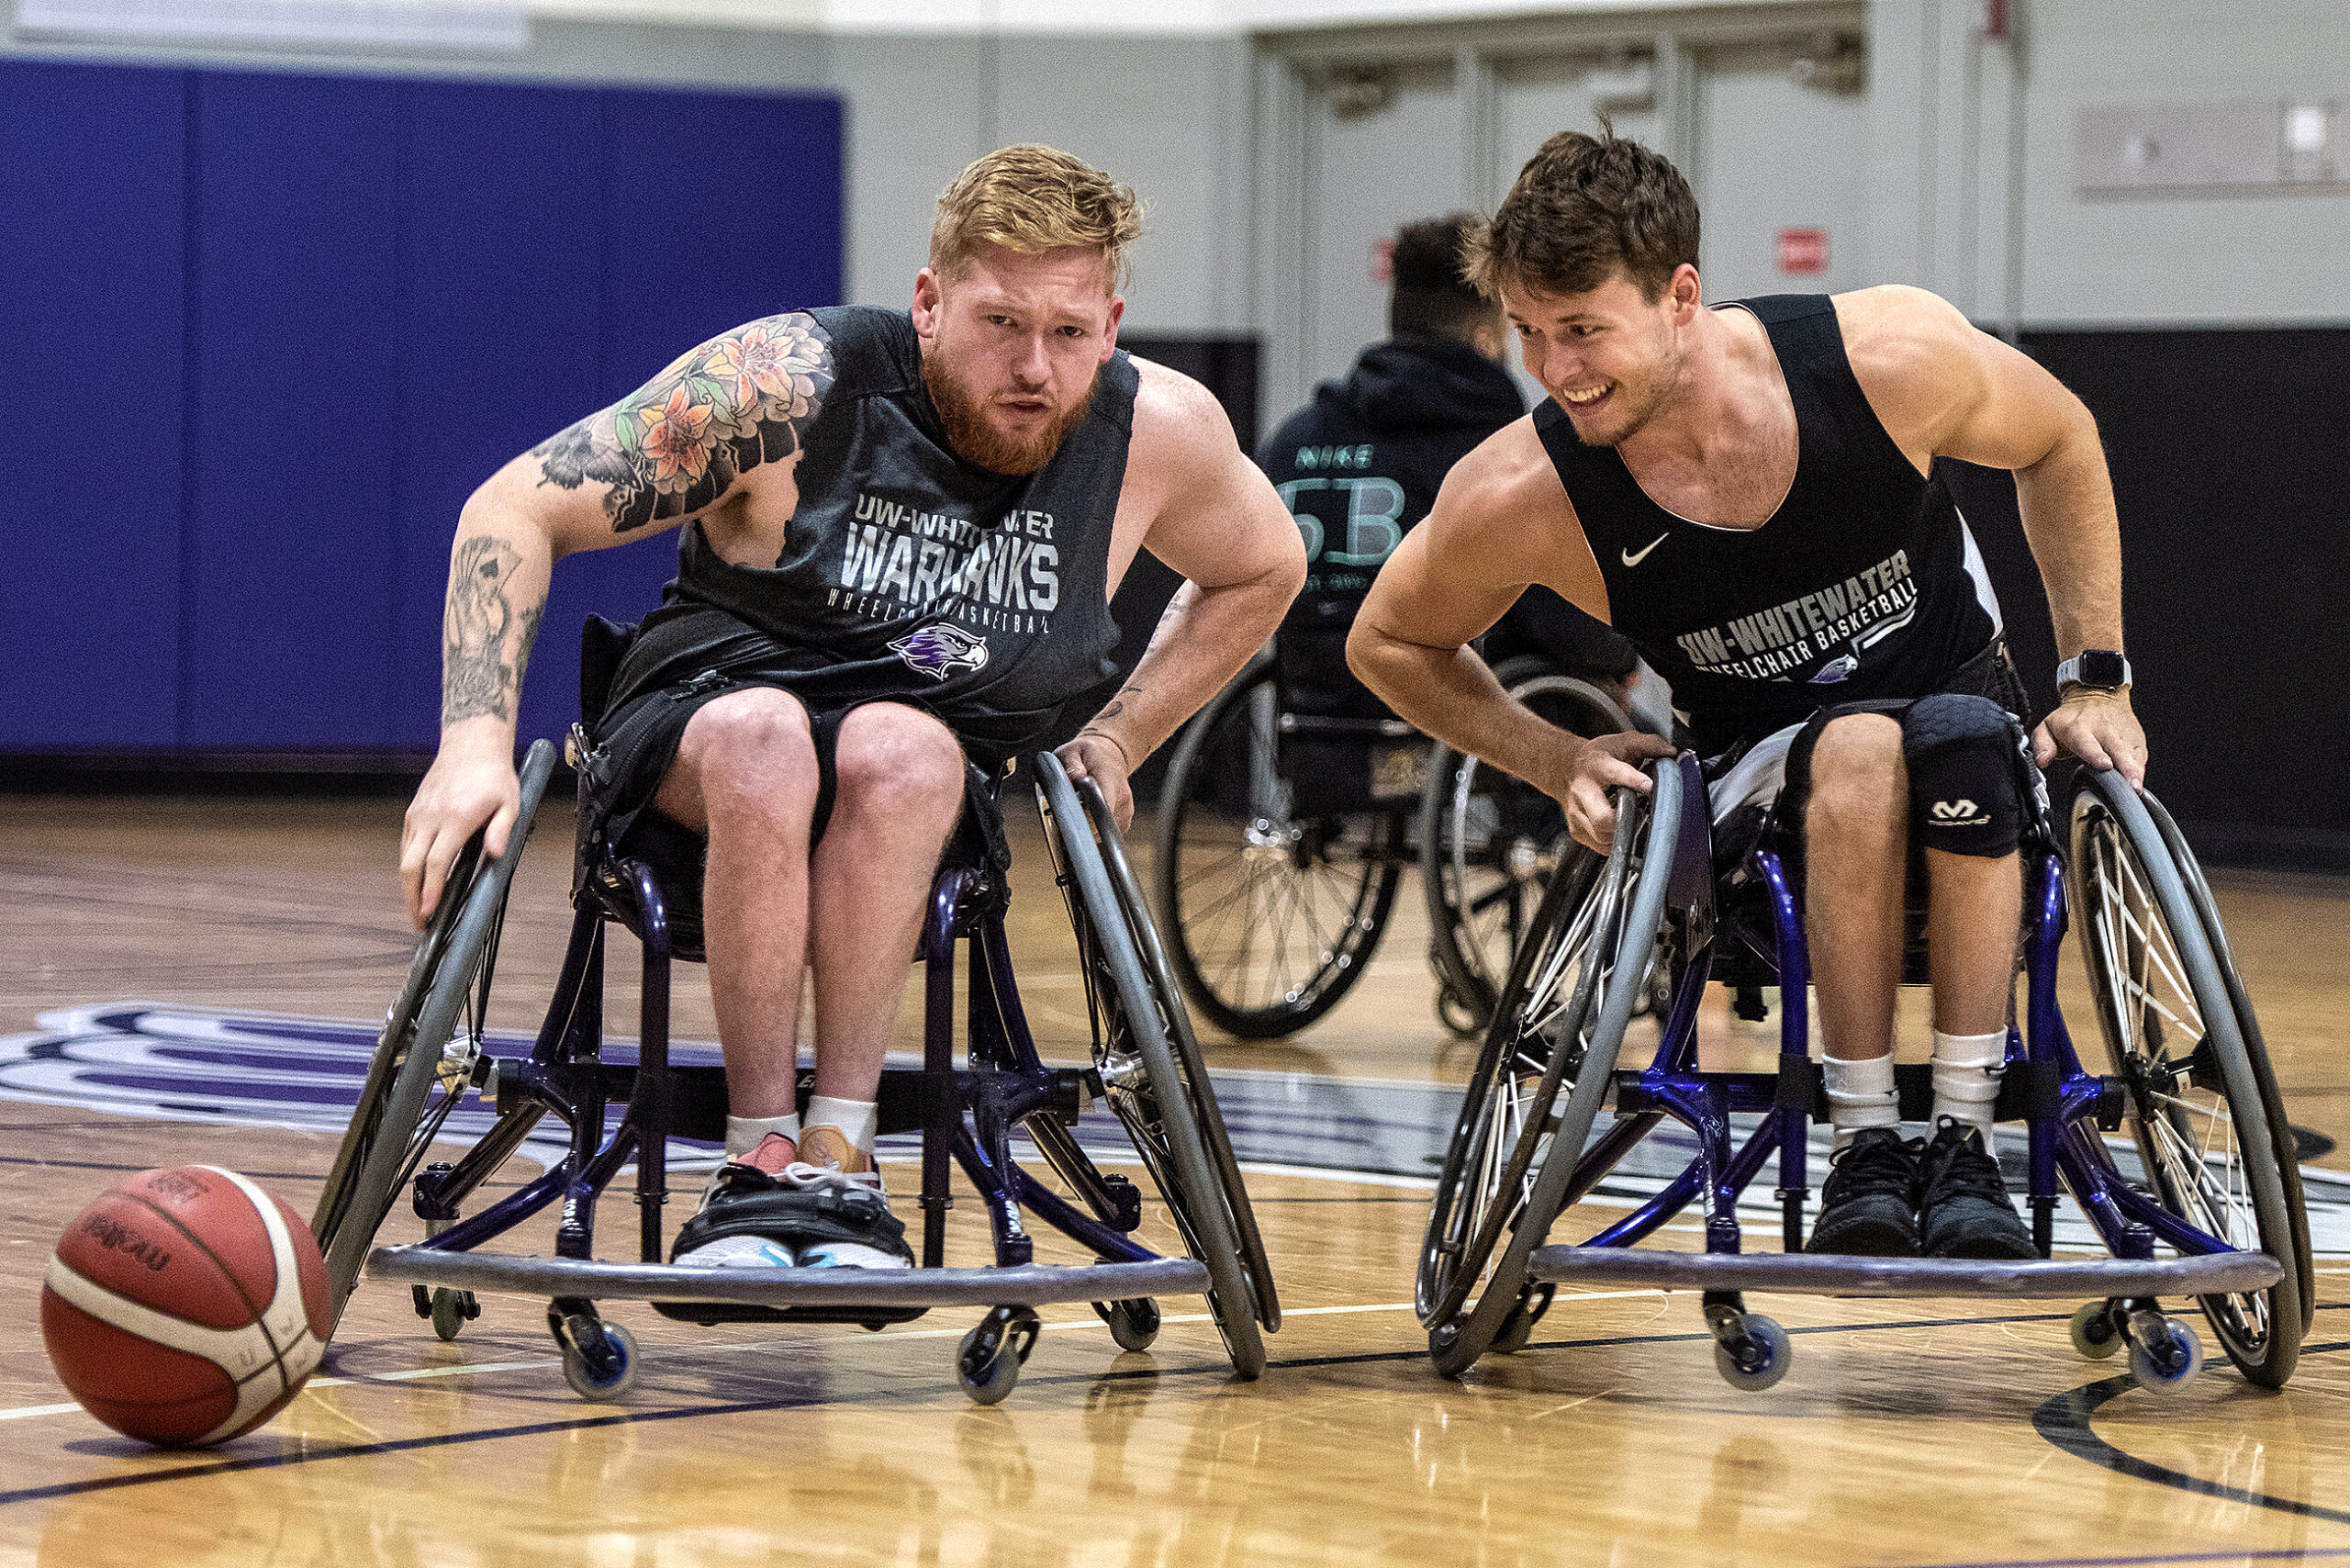 Dominant wheelchair basketball teams back in action at UW-Whitewater: ‘They turn out Paralympic athletes like crazy’